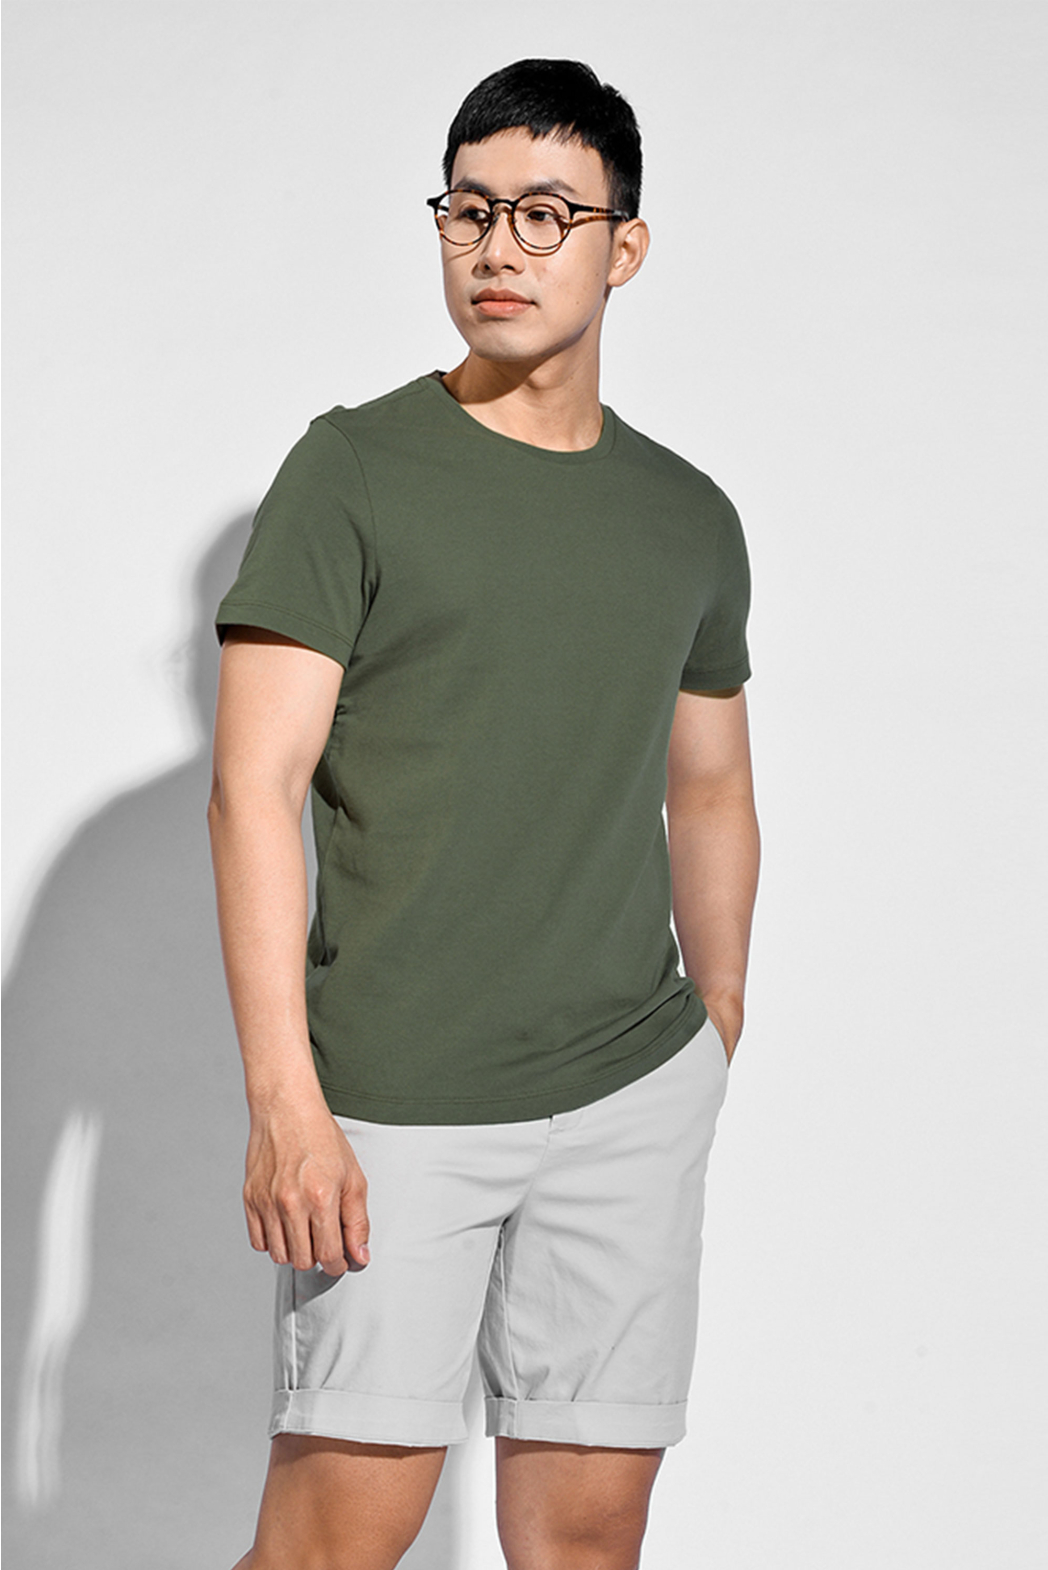 Áo thun tay ngắn. Solid. Cotton. FITTED form - 10S20TSH042